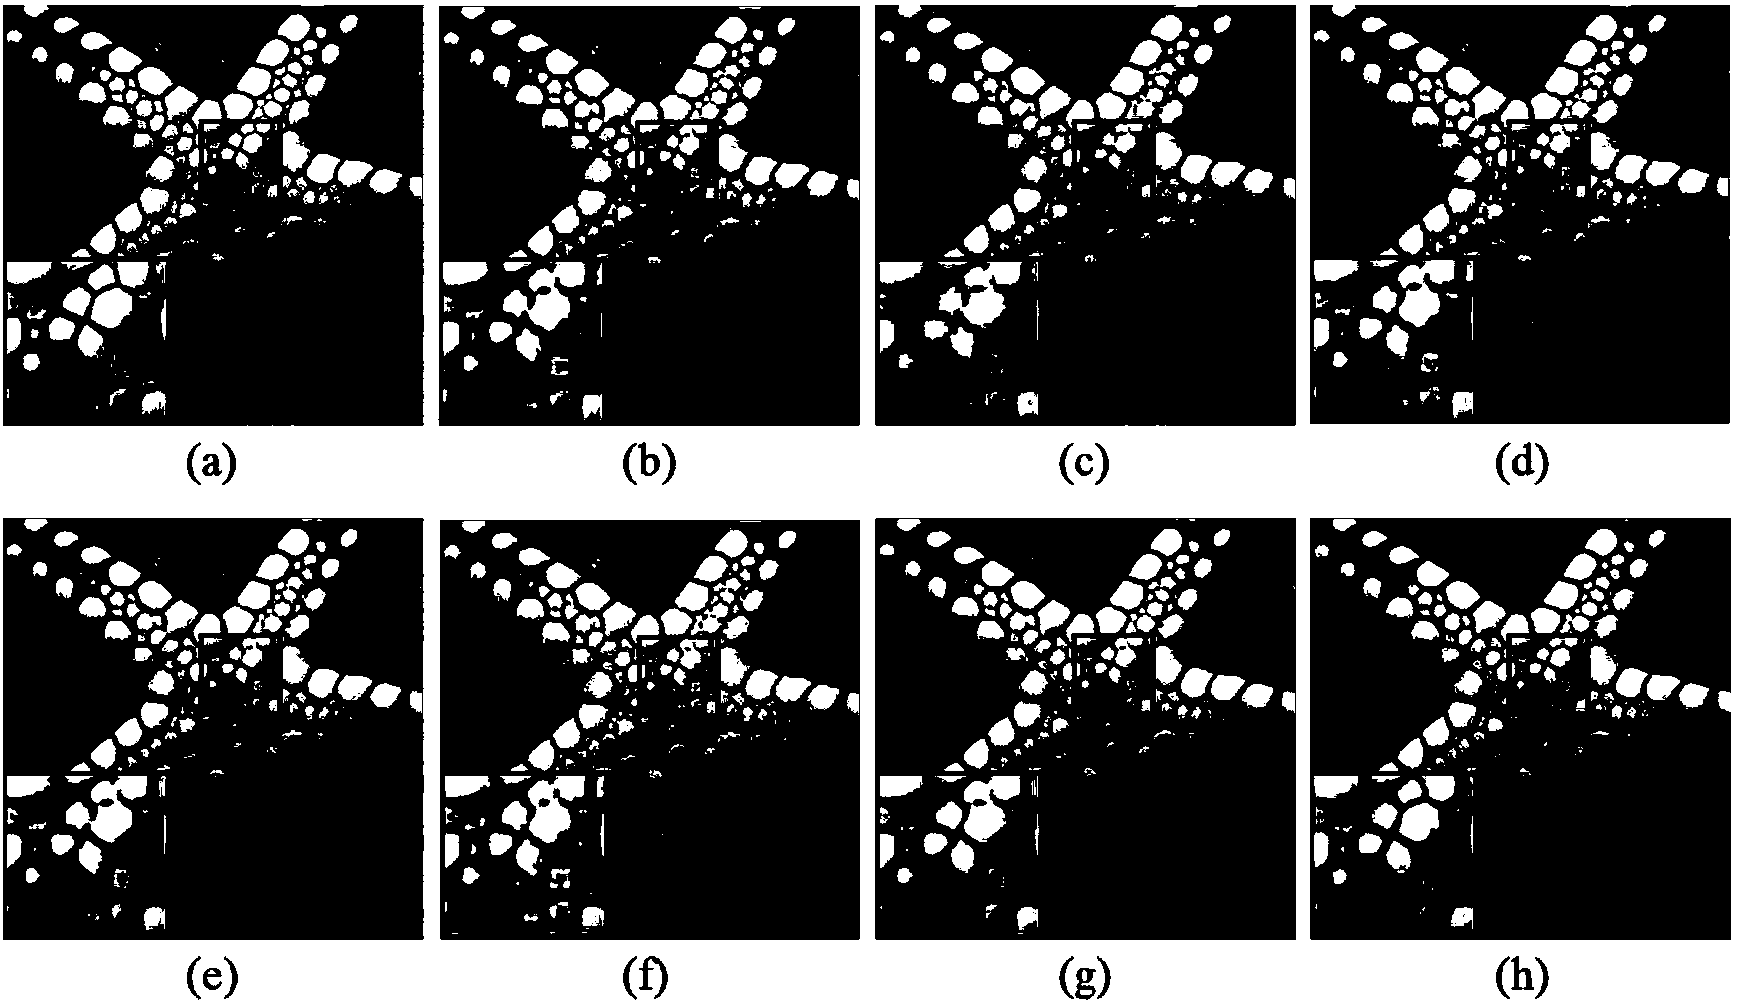 Image super-resolution method based on multi-output least square support vector regression